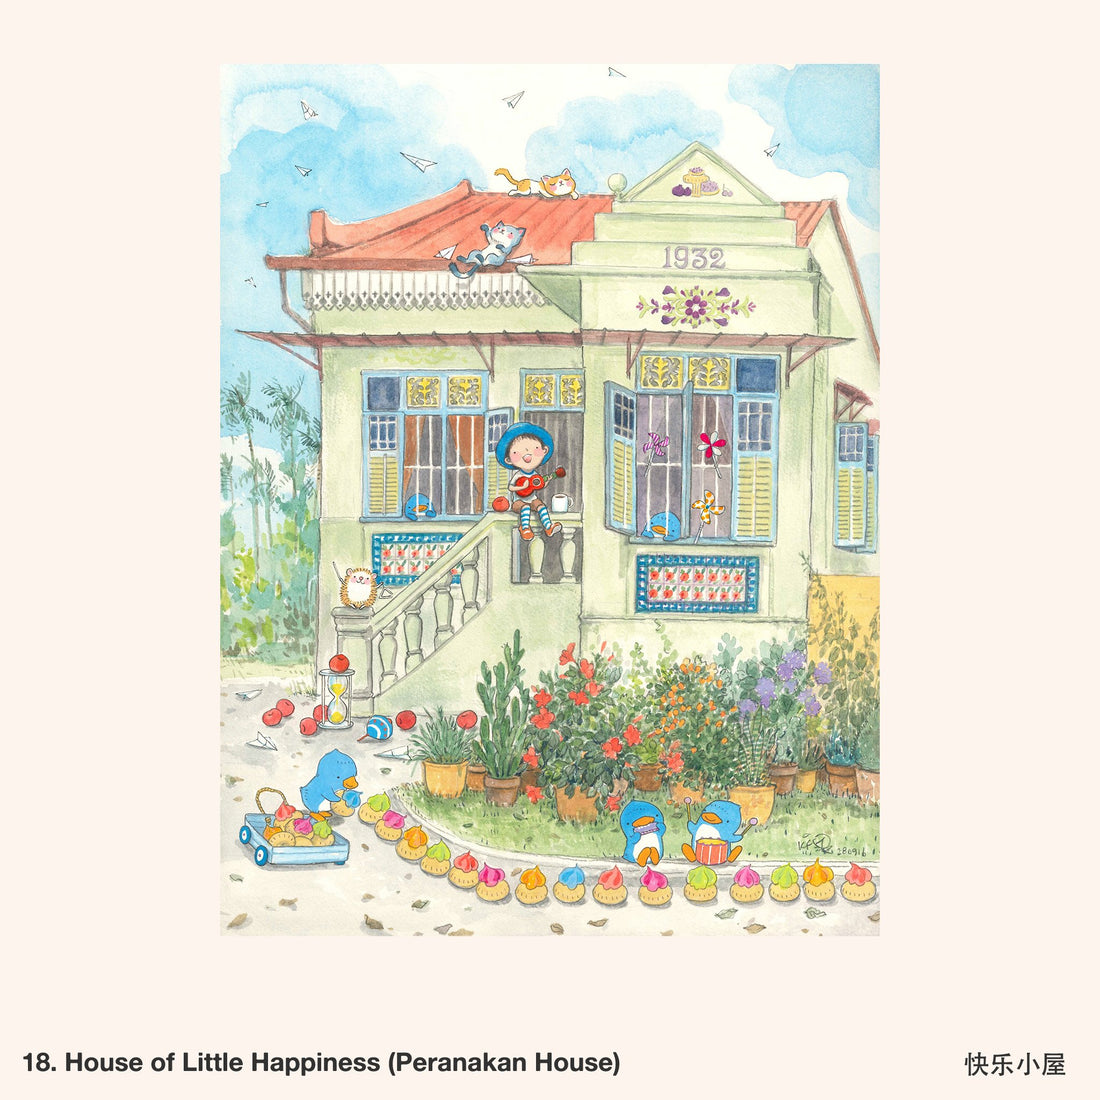 18. House of Little Happiness (Peranakan House) Artwork